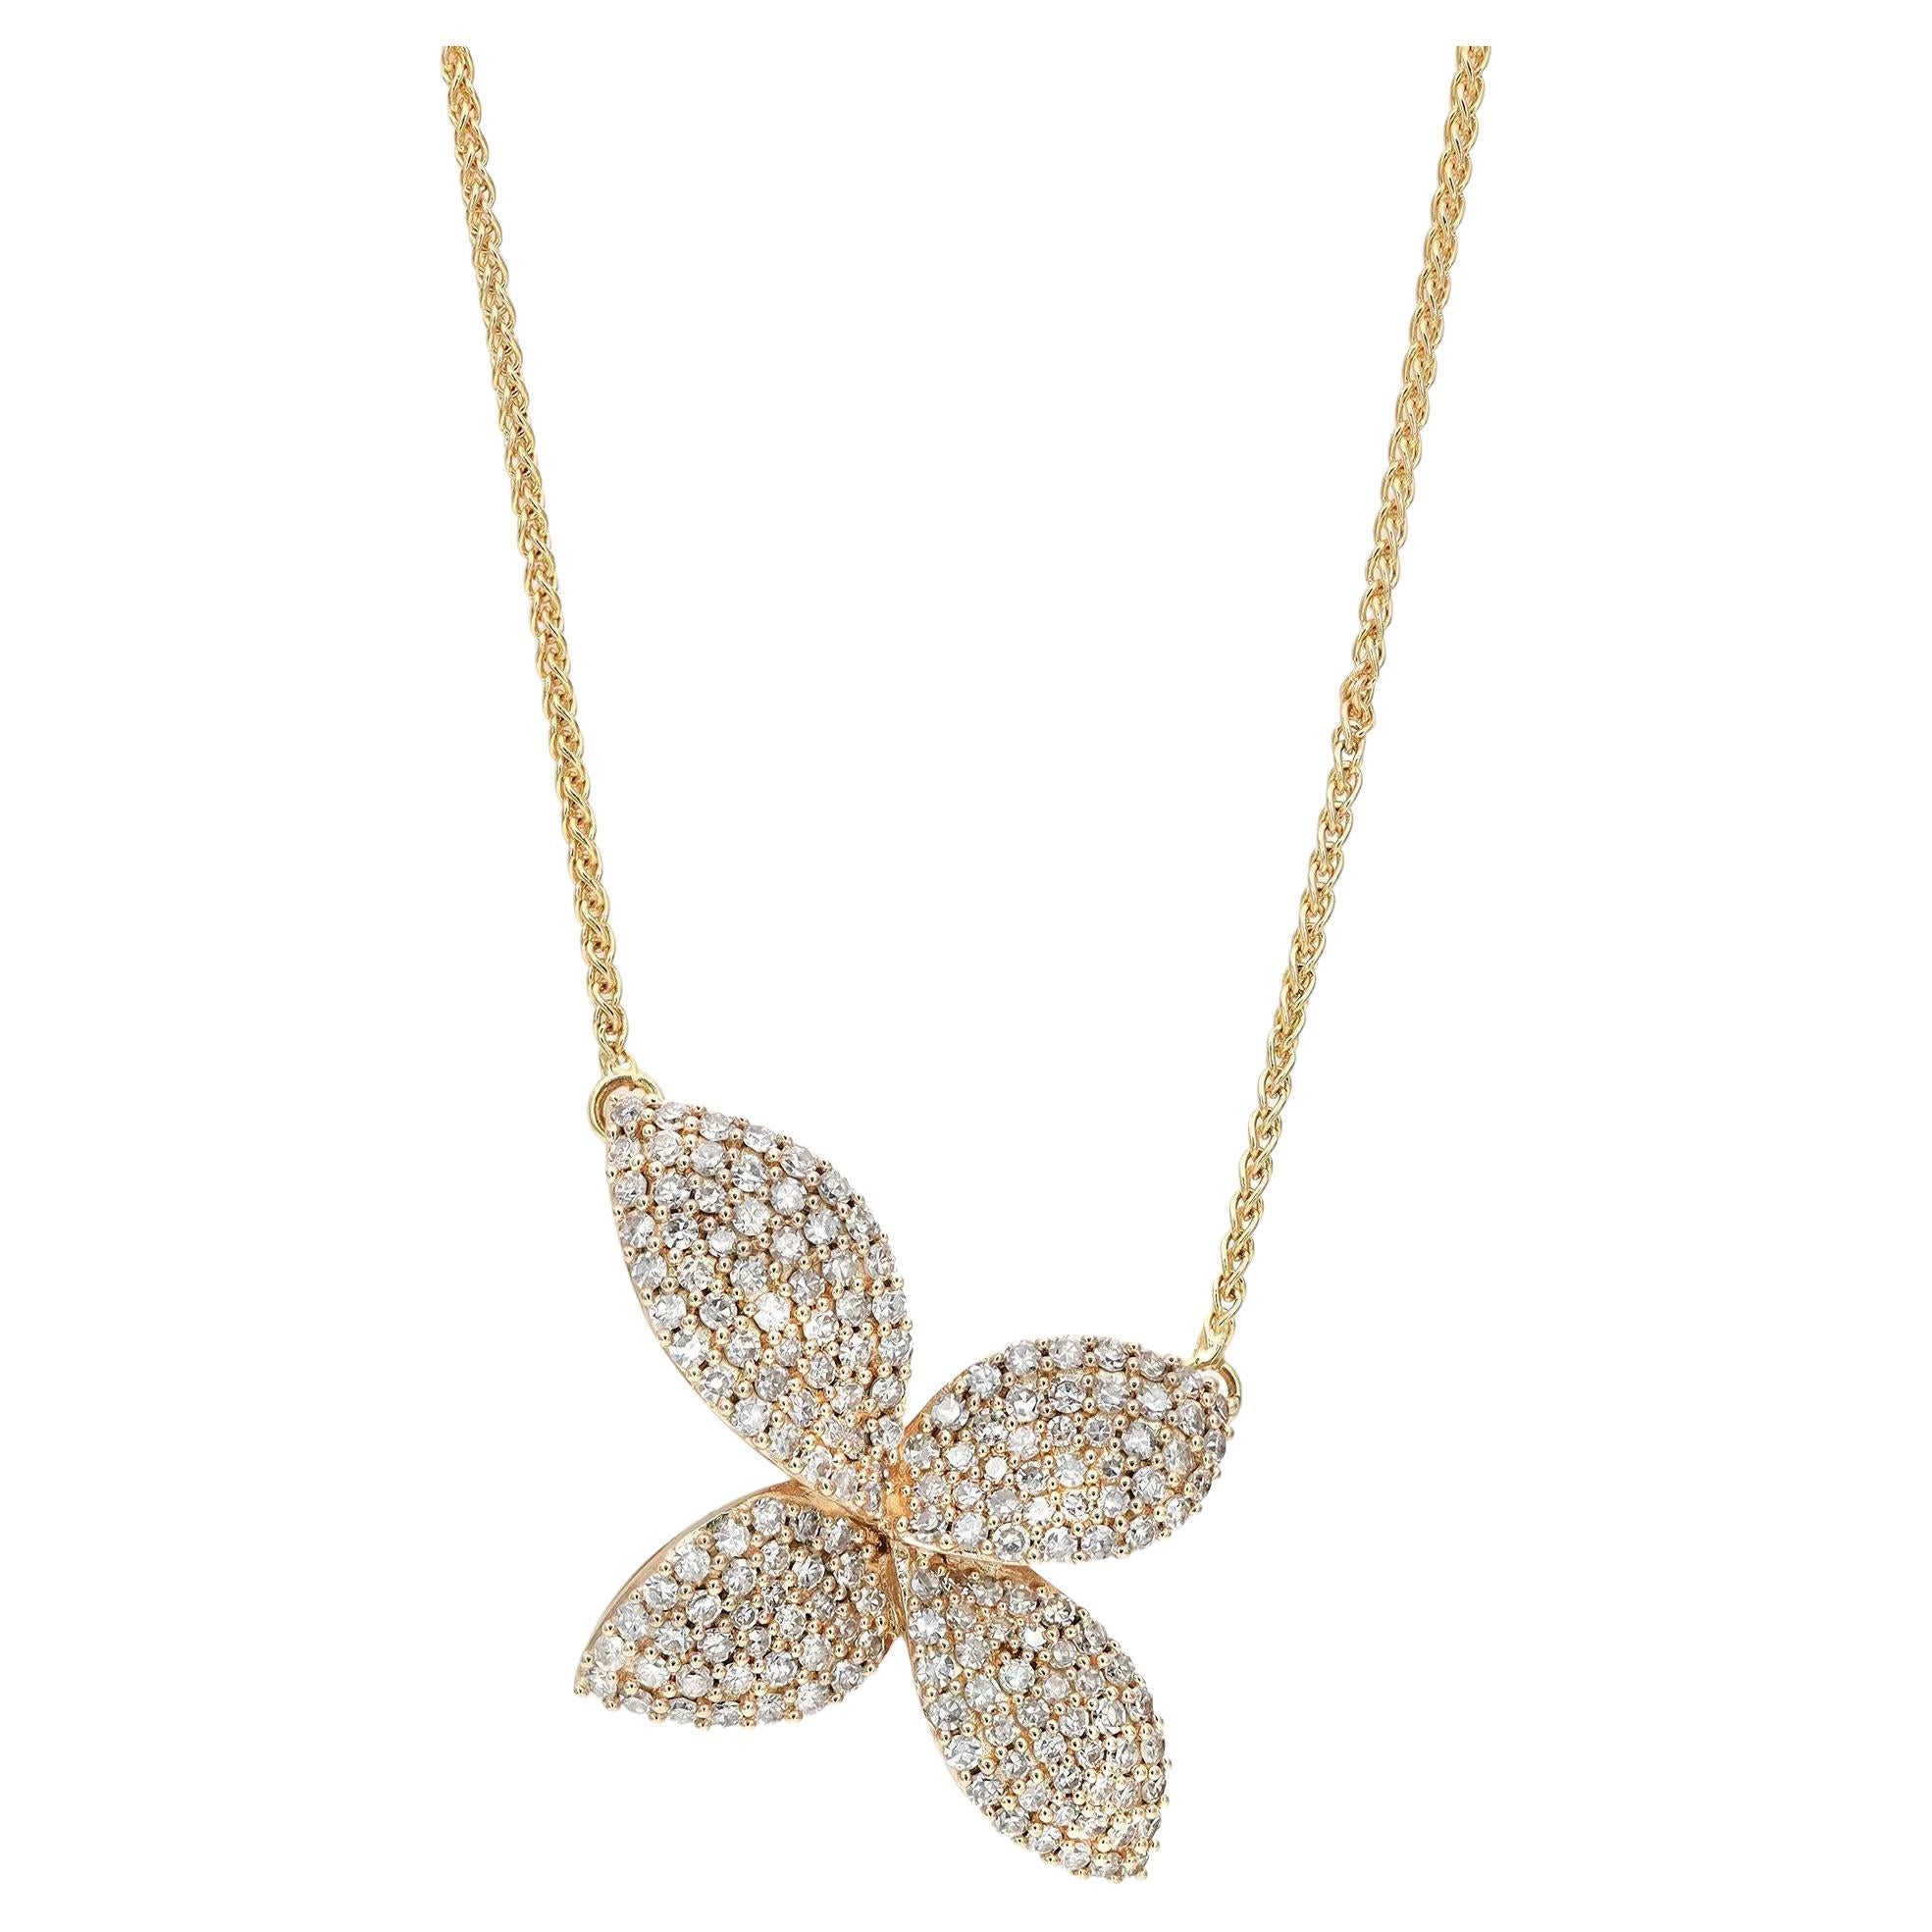 Pave Diamond Floral Pendant Necklace In 14K Yellow Gold 1.00Cttw For Sale